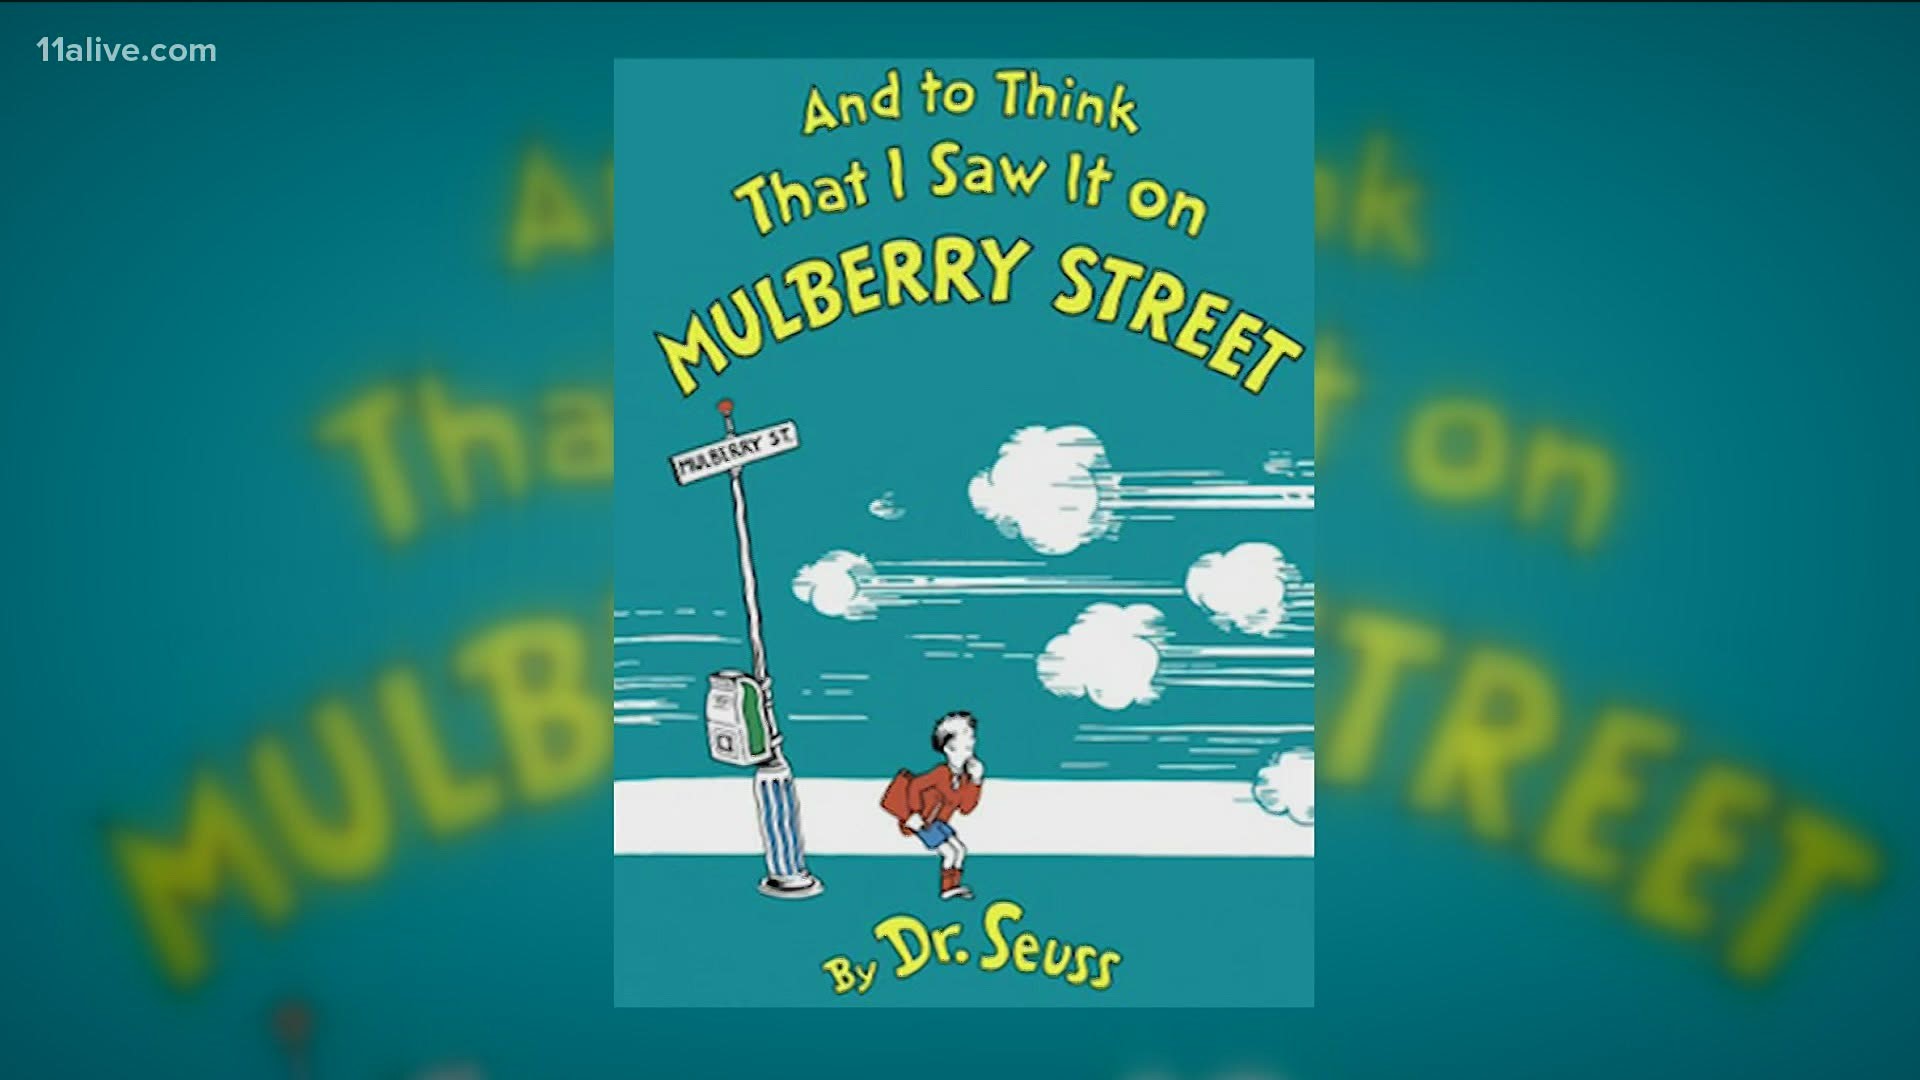 Dr. Seuss Enterprises announced it will no longer sell the books because they "portray people in ways that are hurtful and wrong."